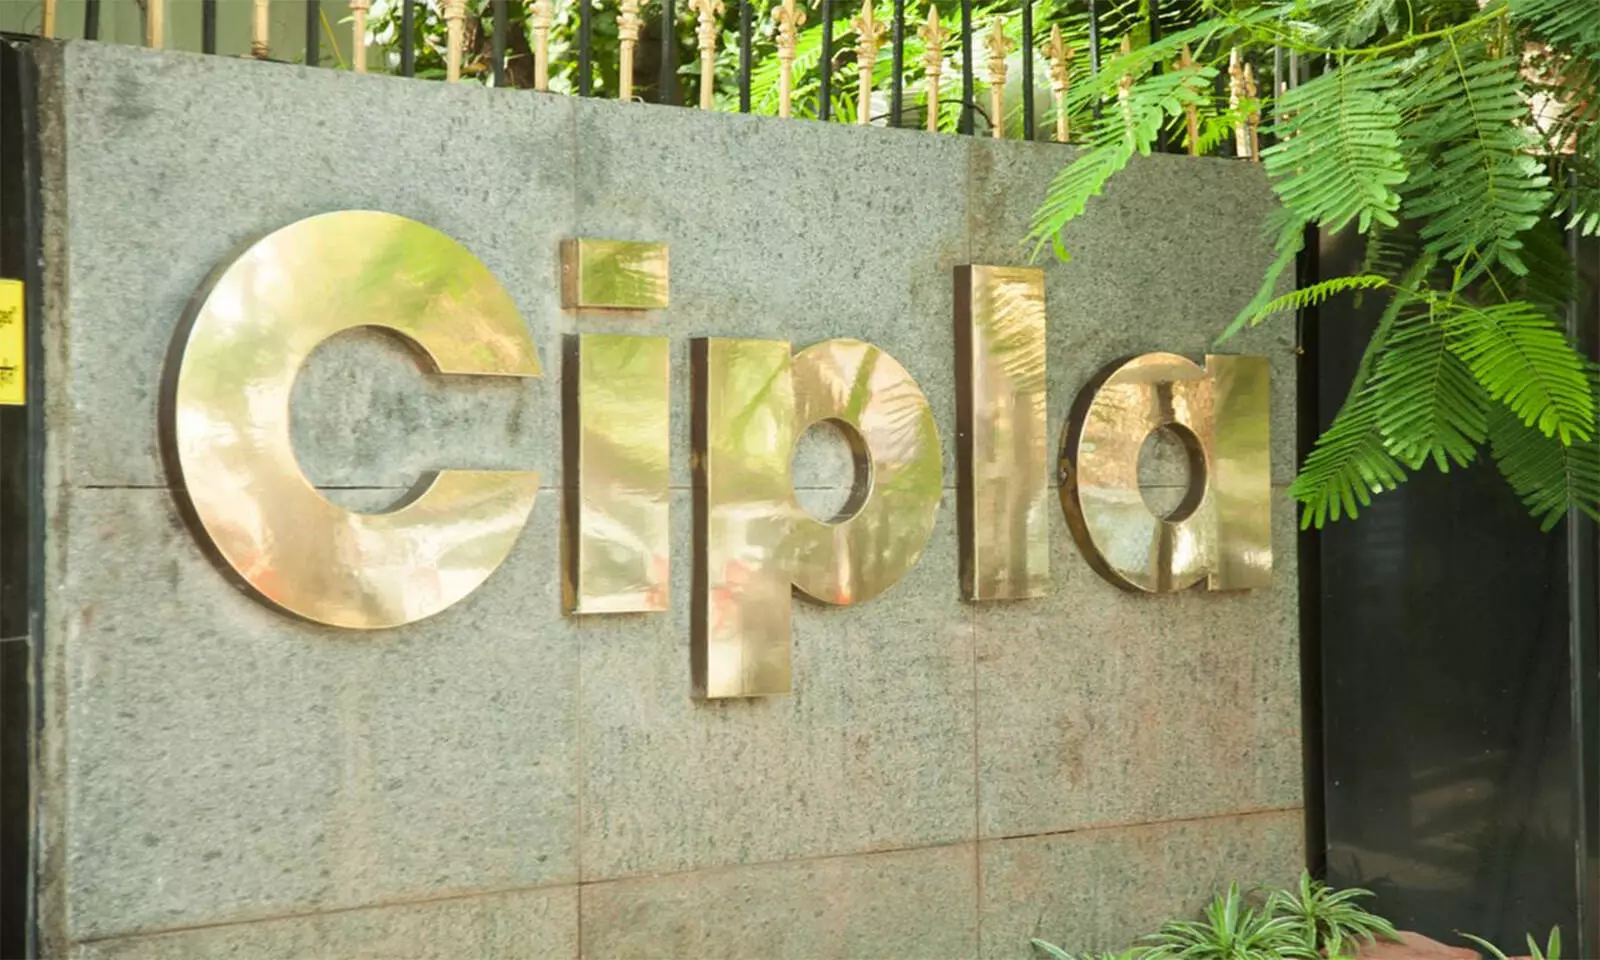 Cipla proposal to market Plazomicin with clinical trial waiver rejected by CDSCO panel